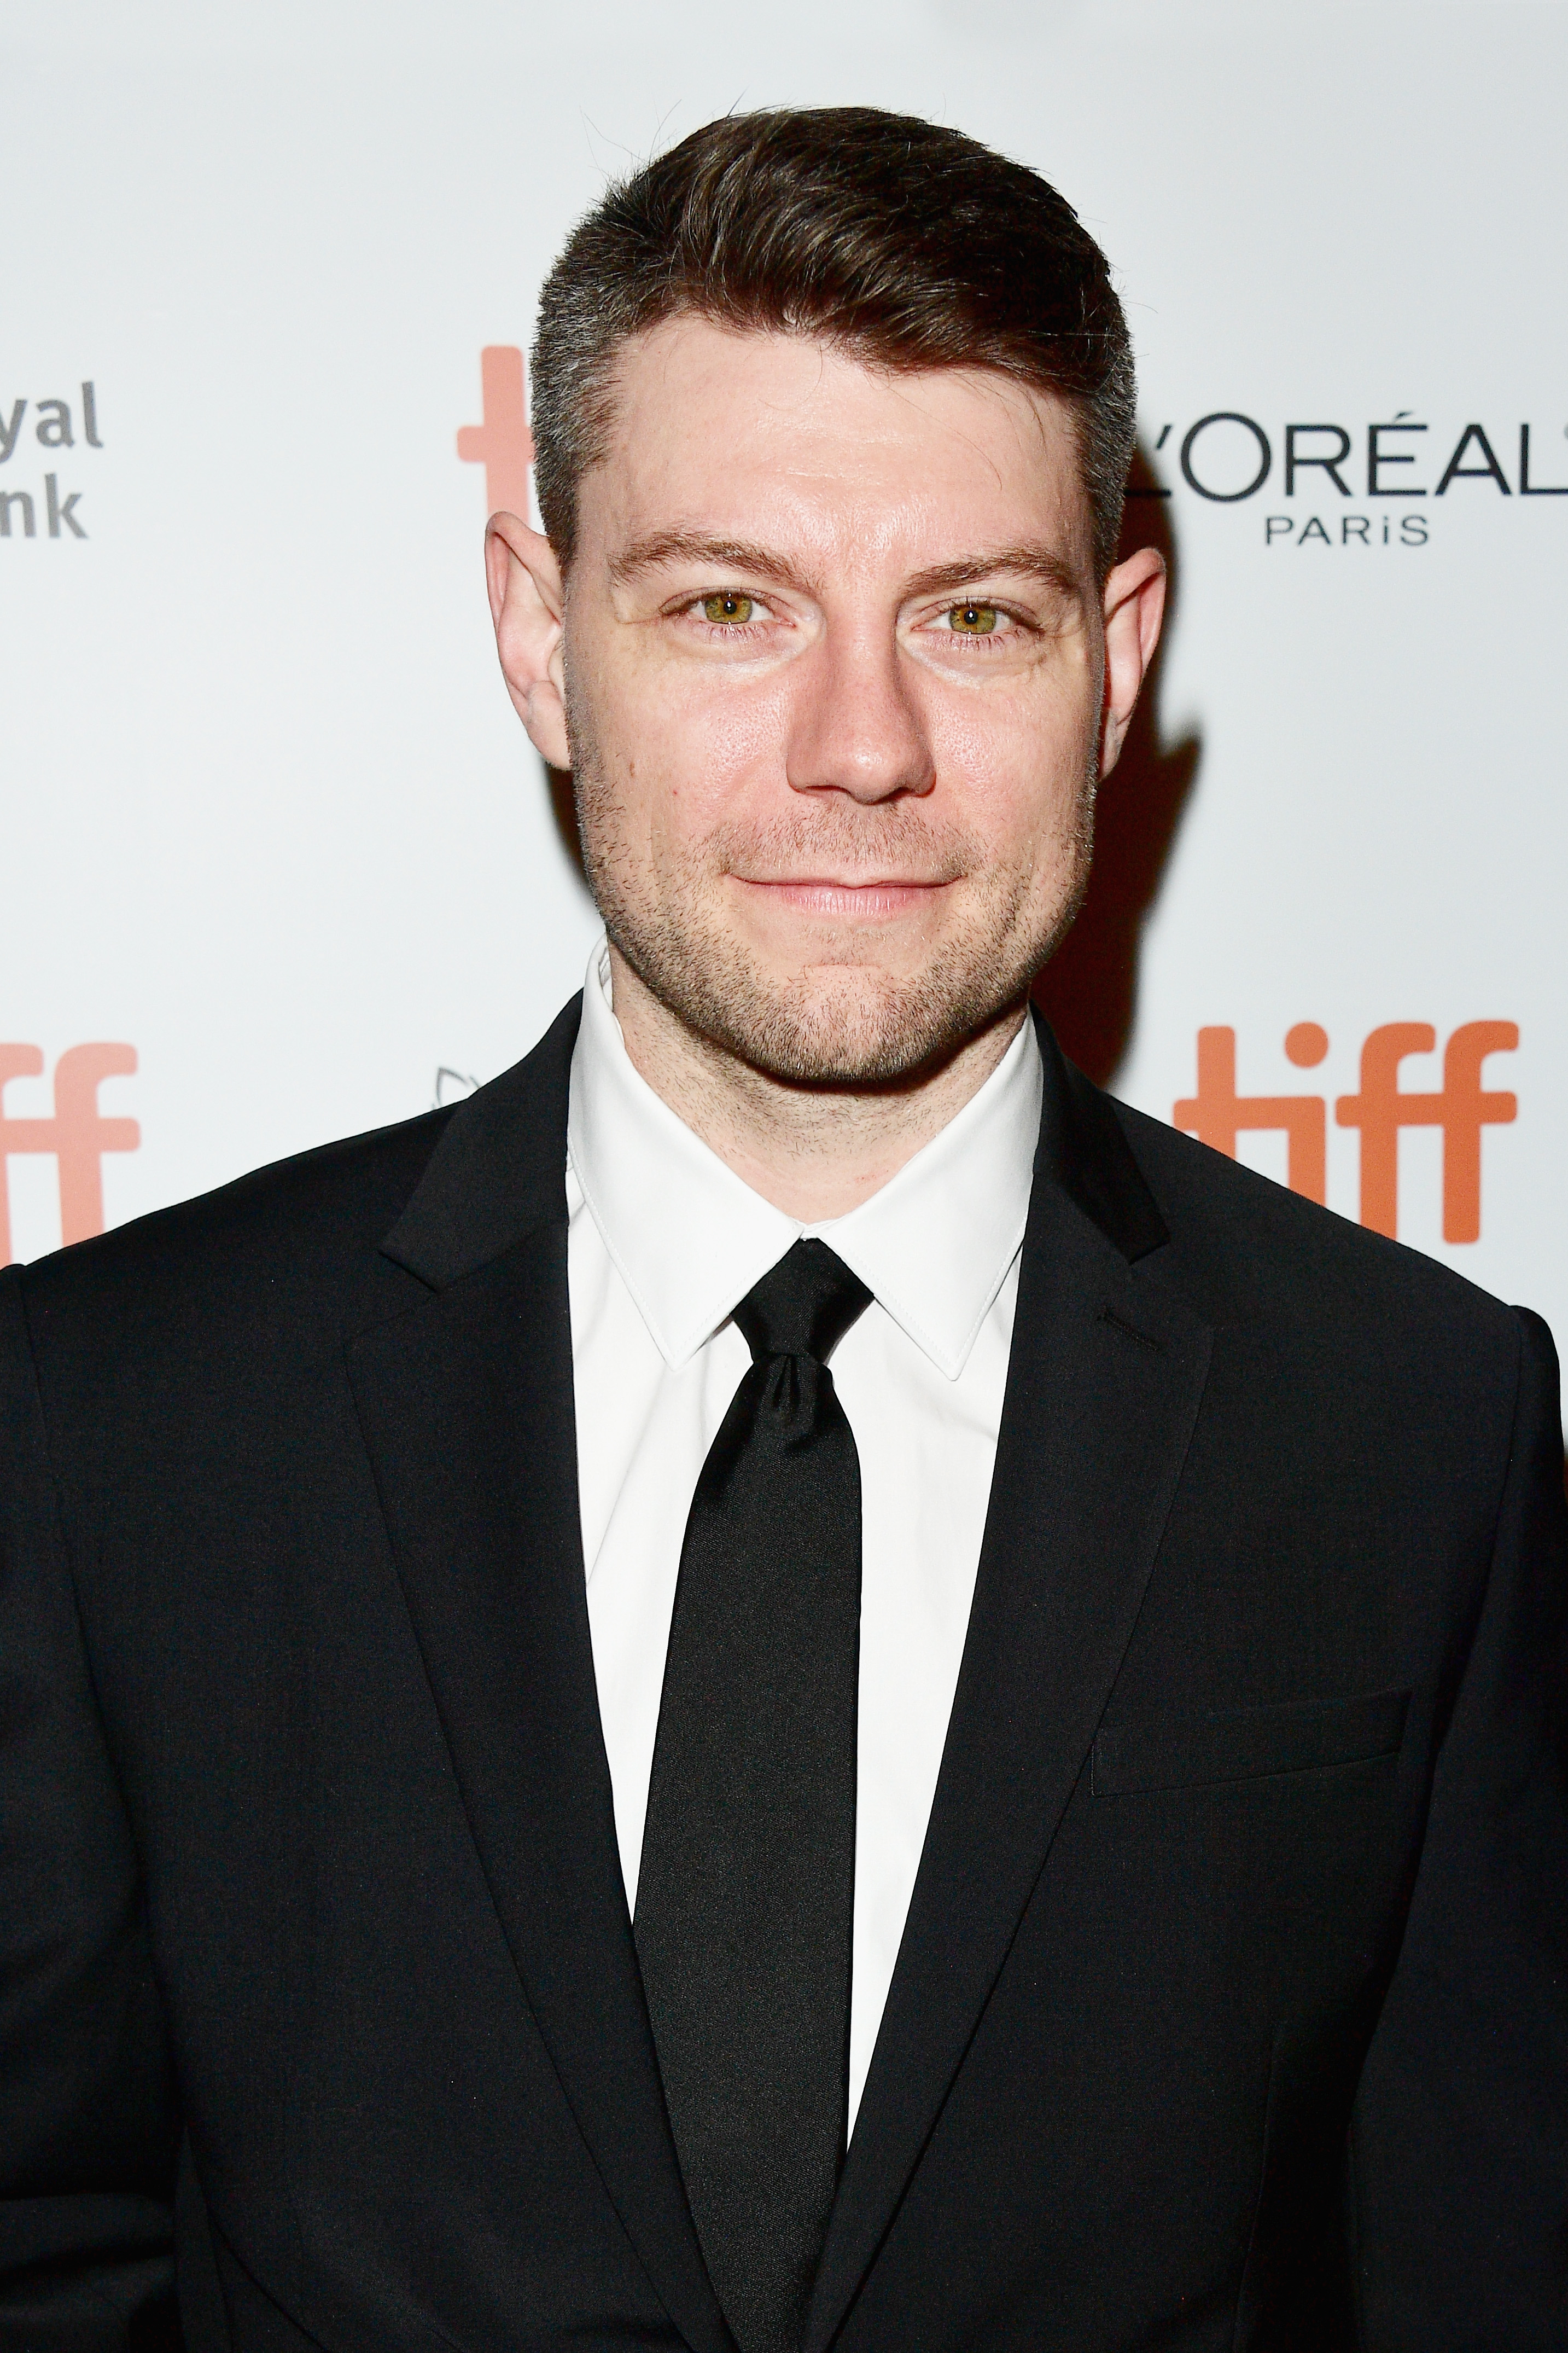 Patrick Fugit during the 2018 Toronto International Film Festival at The Elgin on September 10, 2018, in Toronto, Canada. | Source: Getty Images